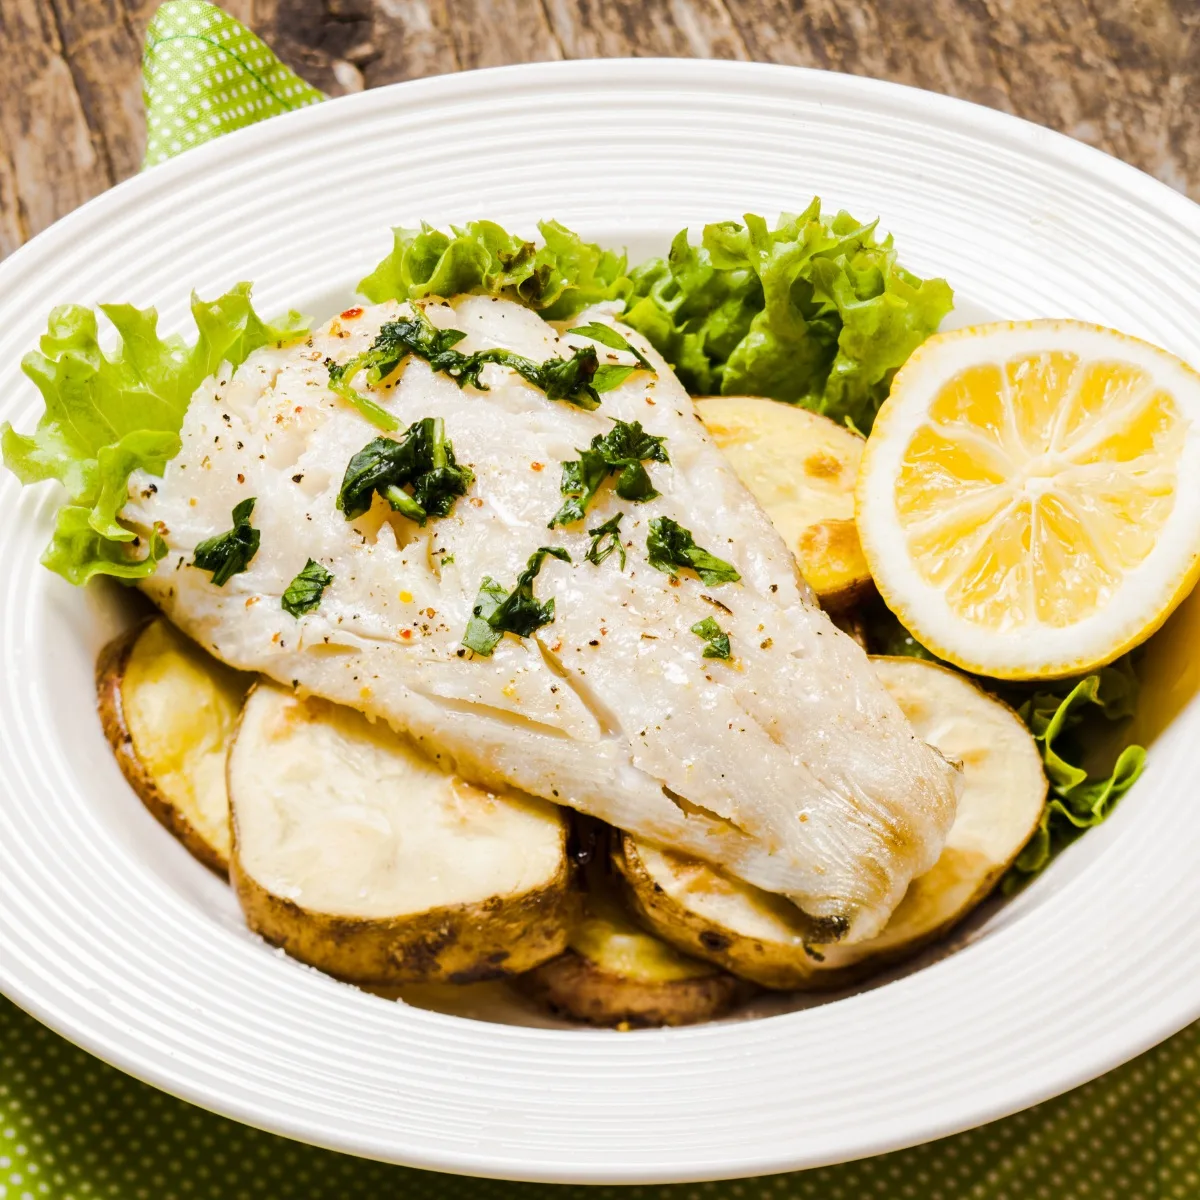 baked cod